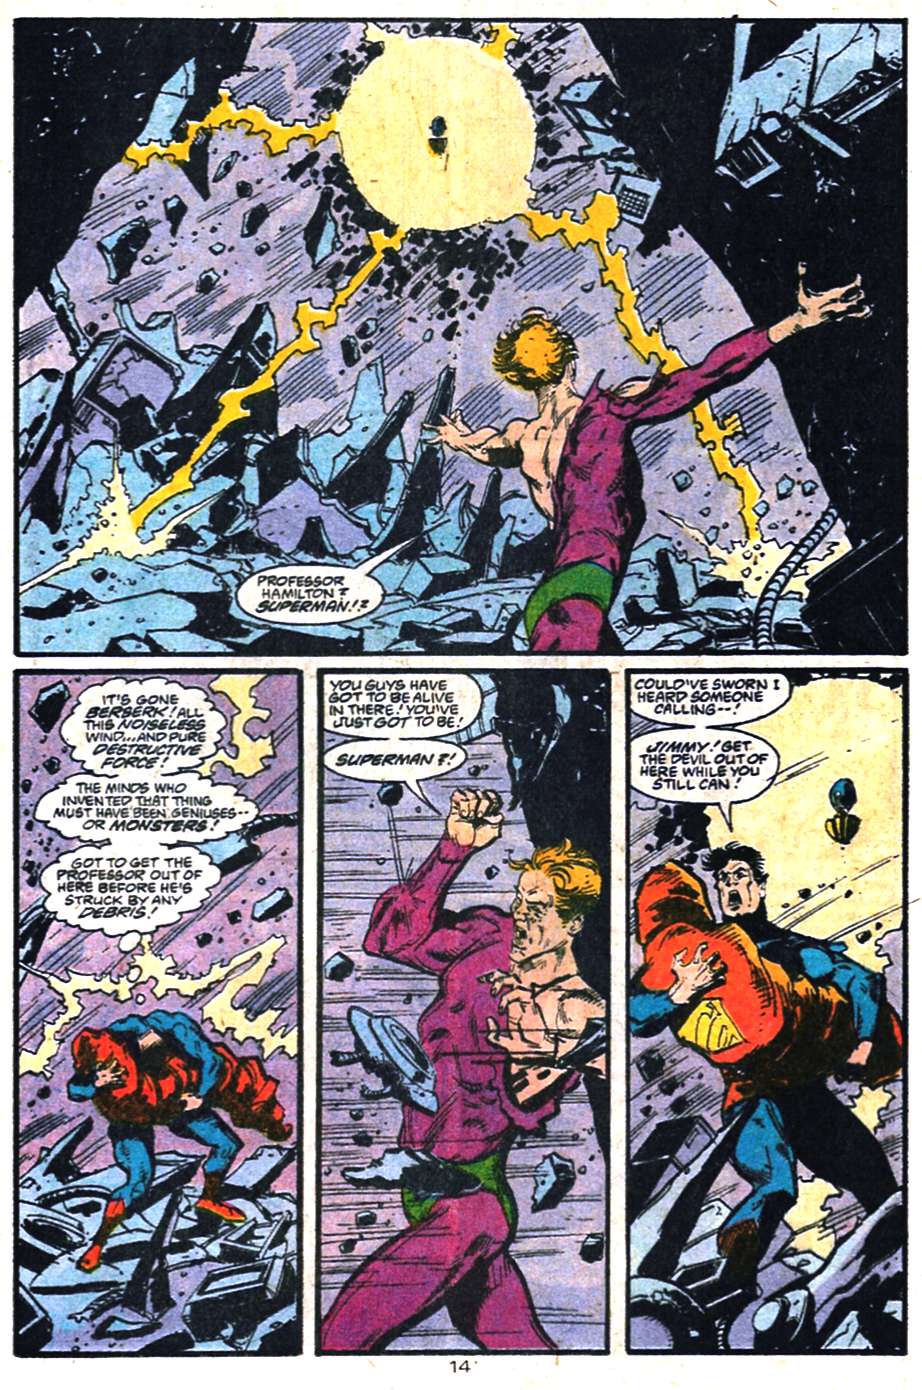 Adventures of Superman (1987) 459 Page 14